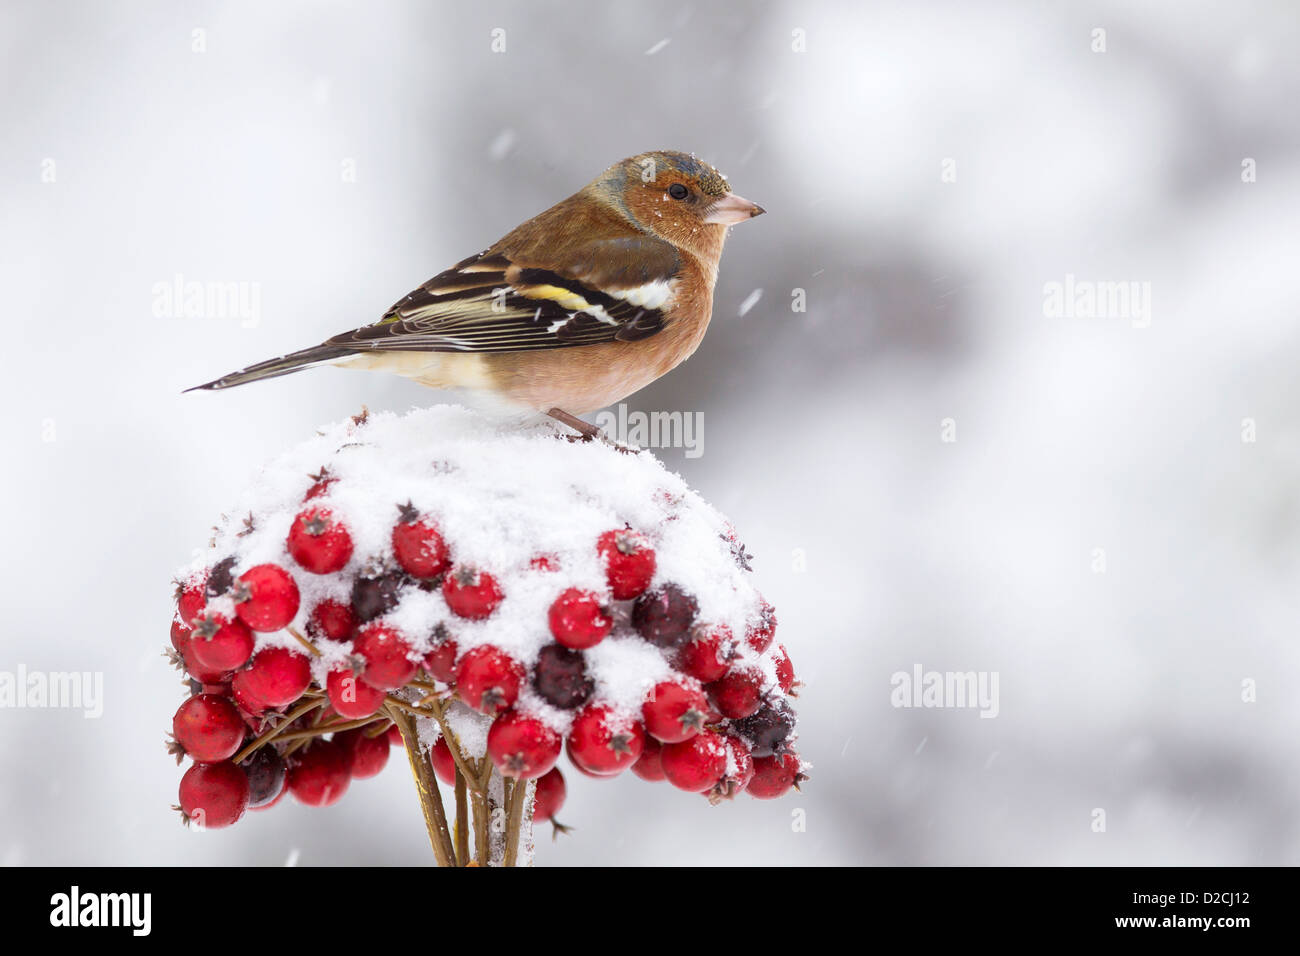 Male Chaffinch on red berries in the snow Stock Photo